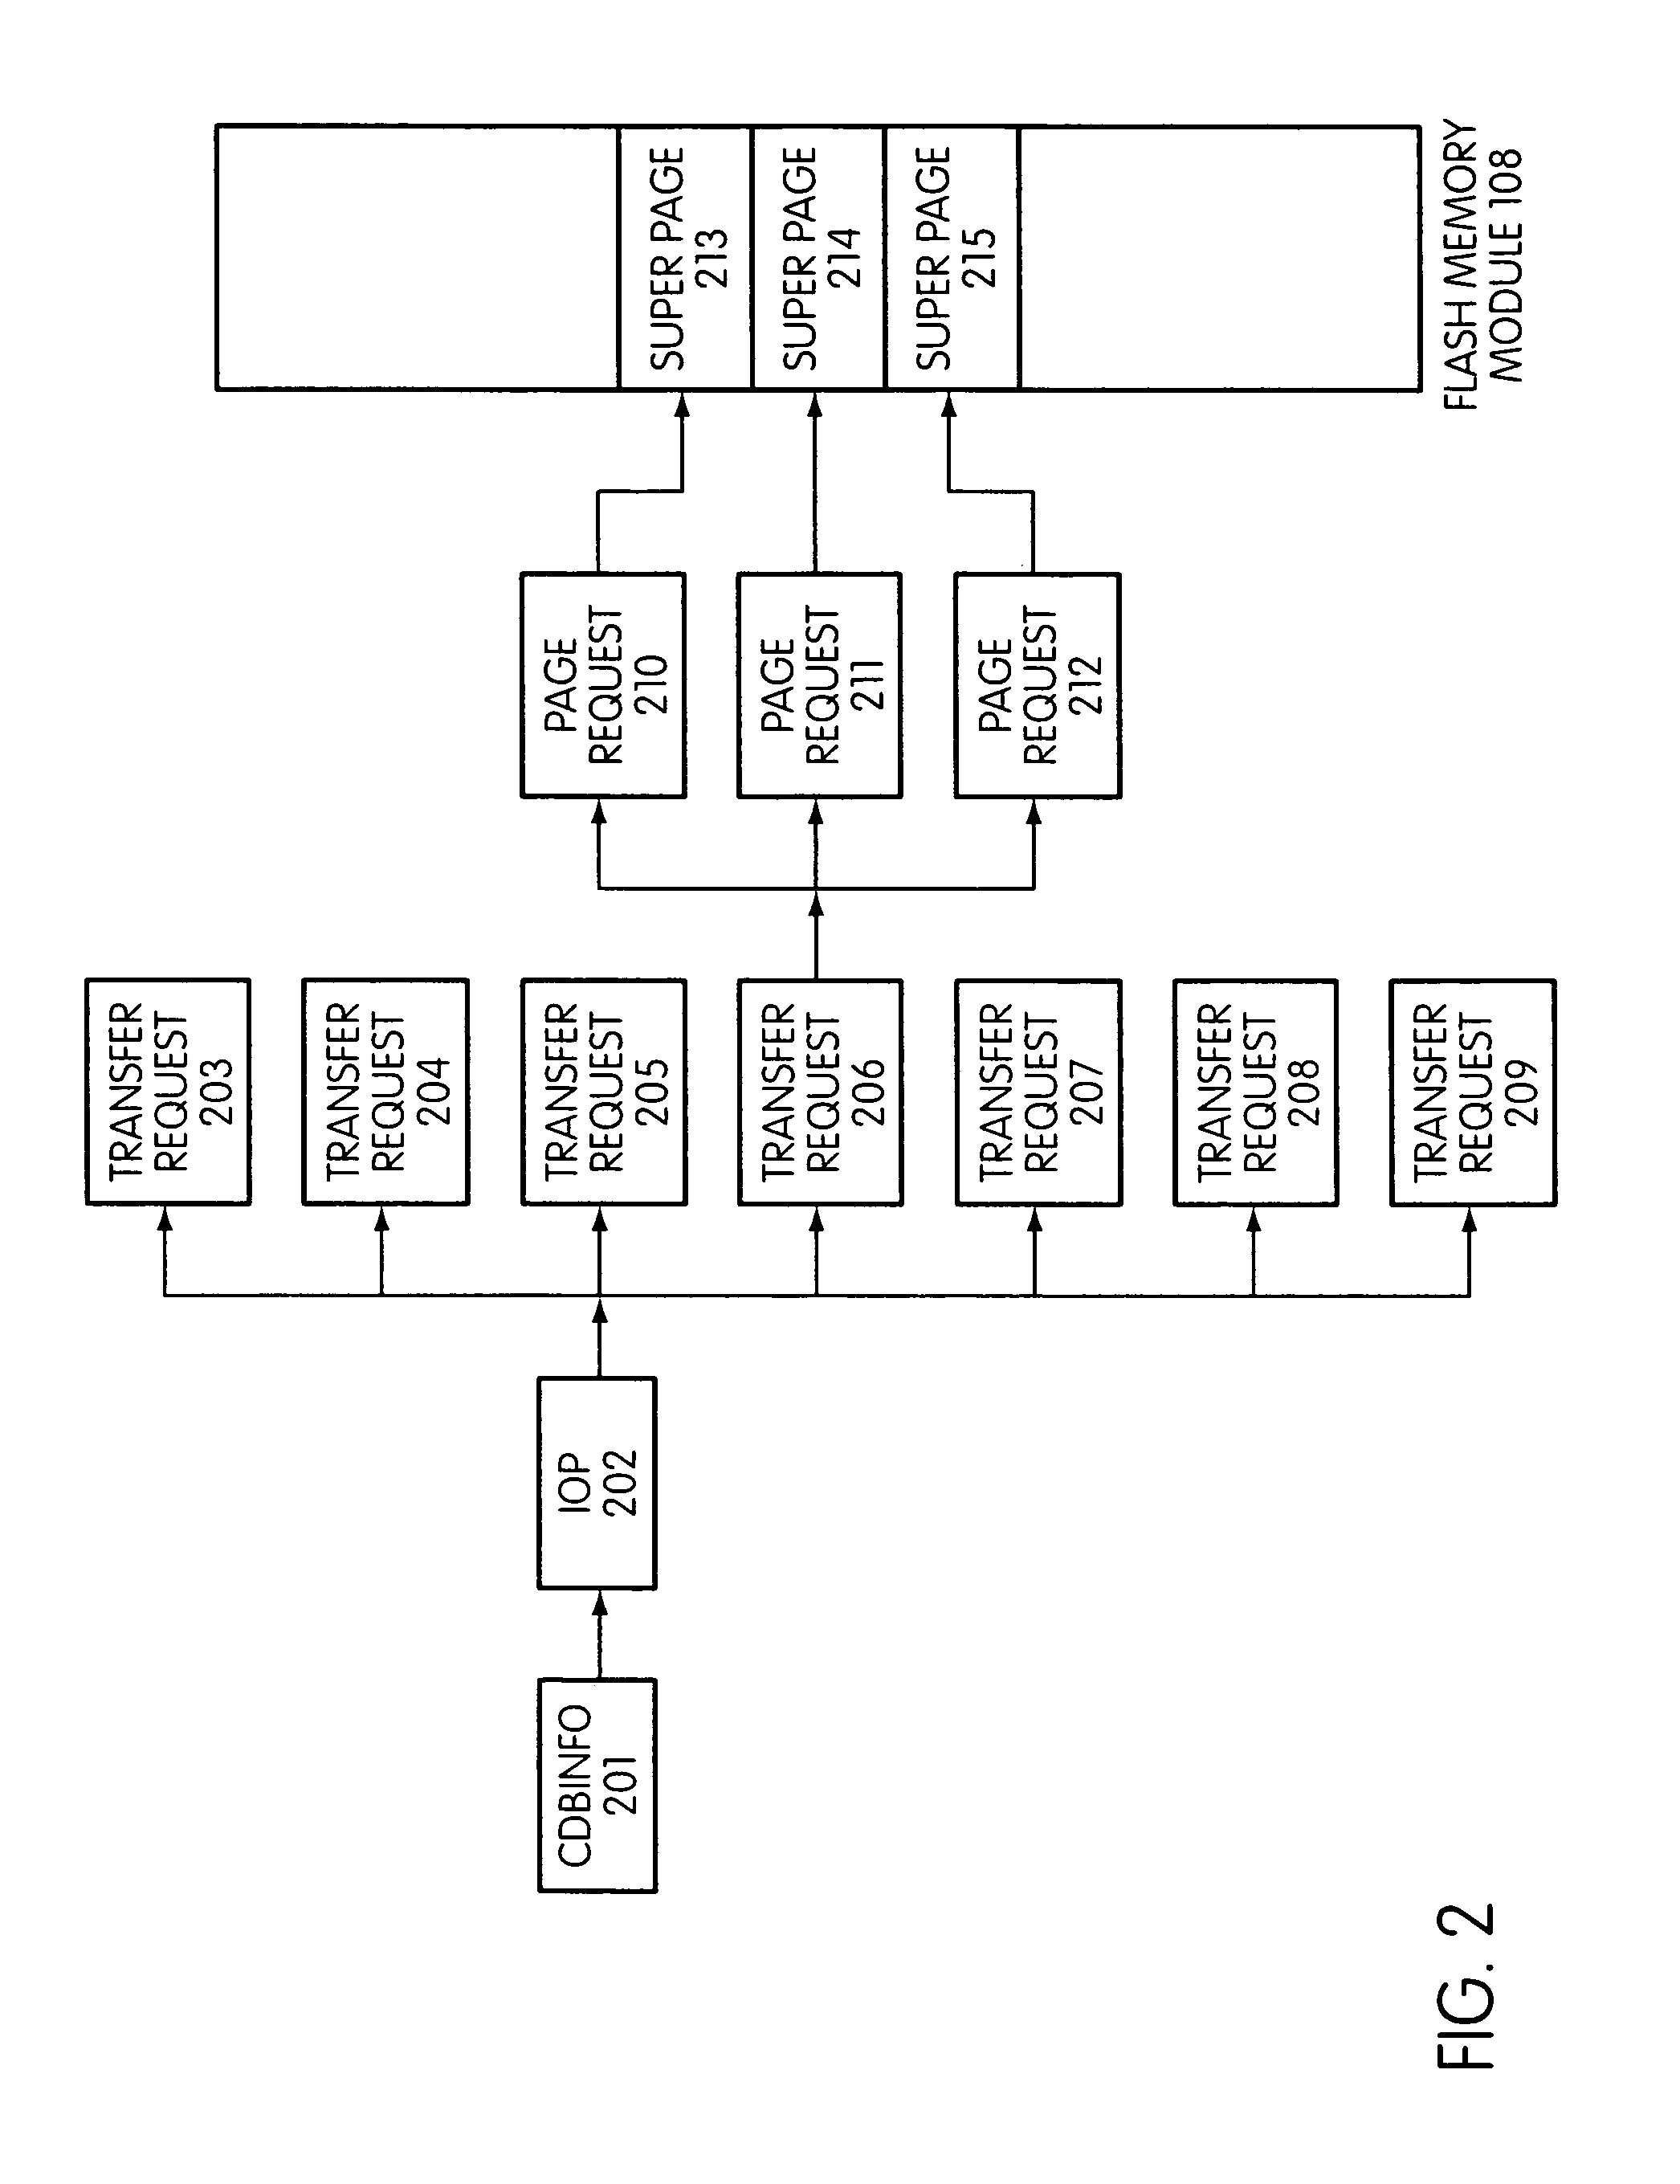 System and method for performing host initiated mass storage commands using a hierarchy of data structures